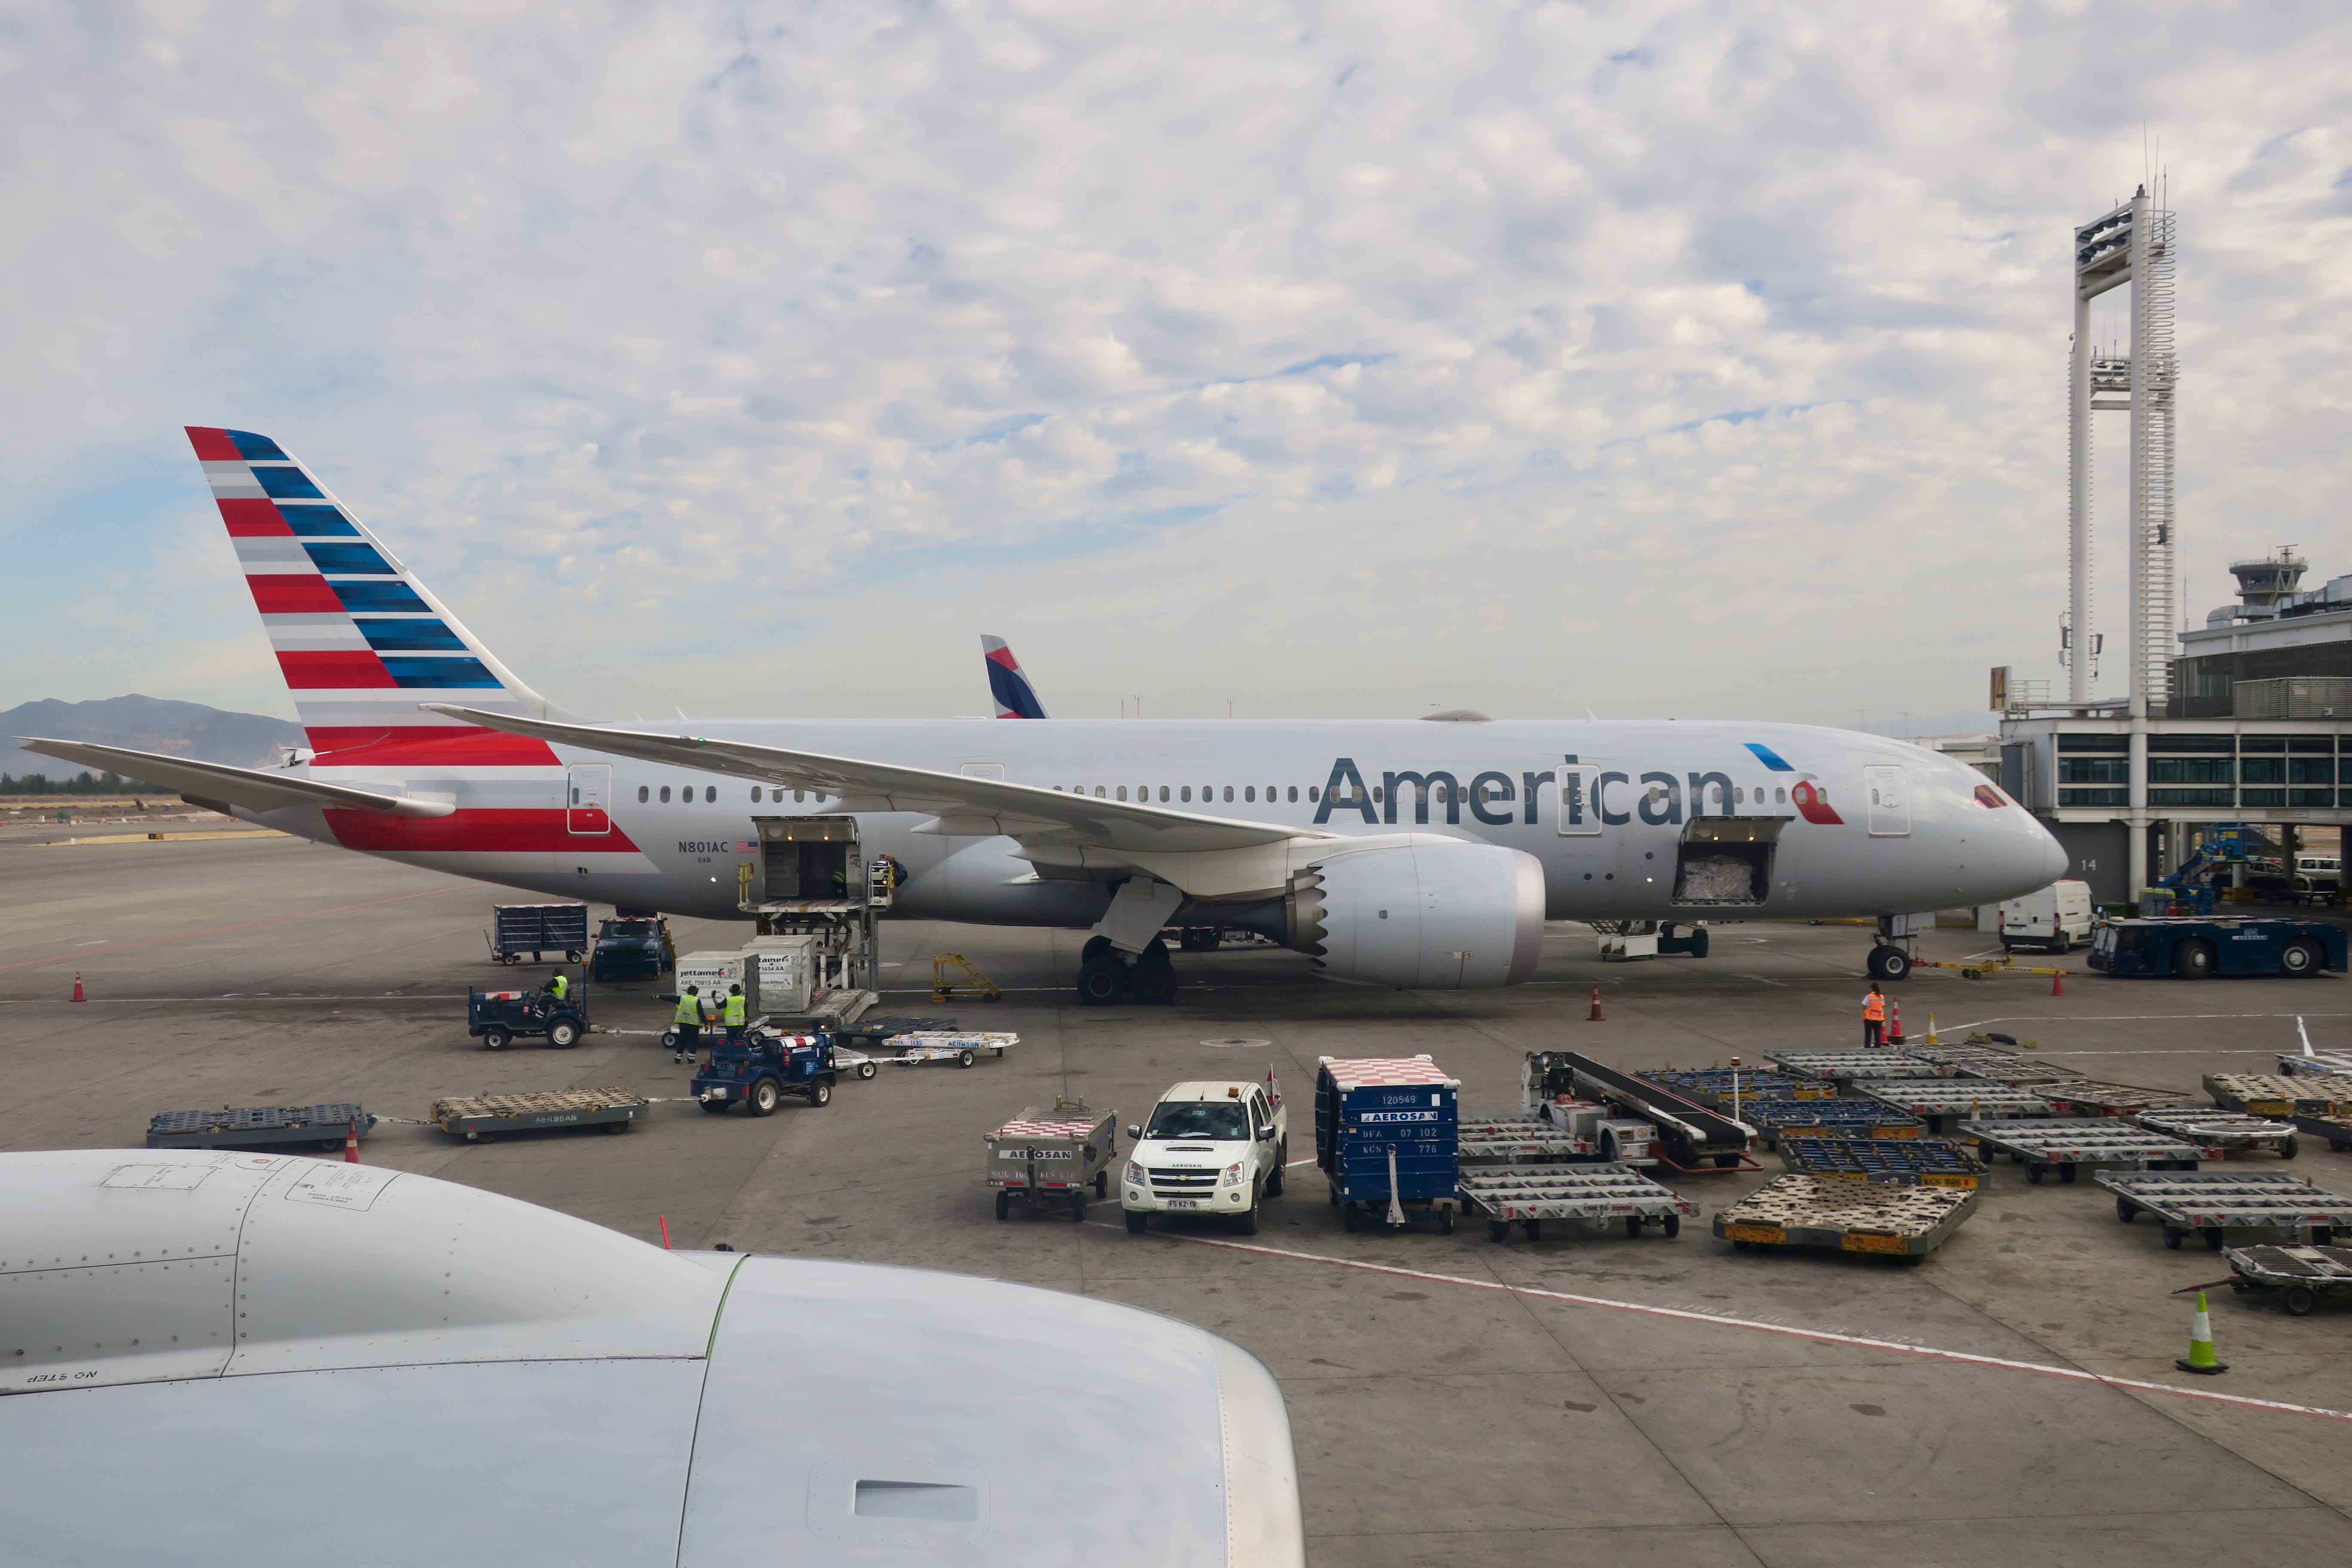 American Airlines airplane on tarmac